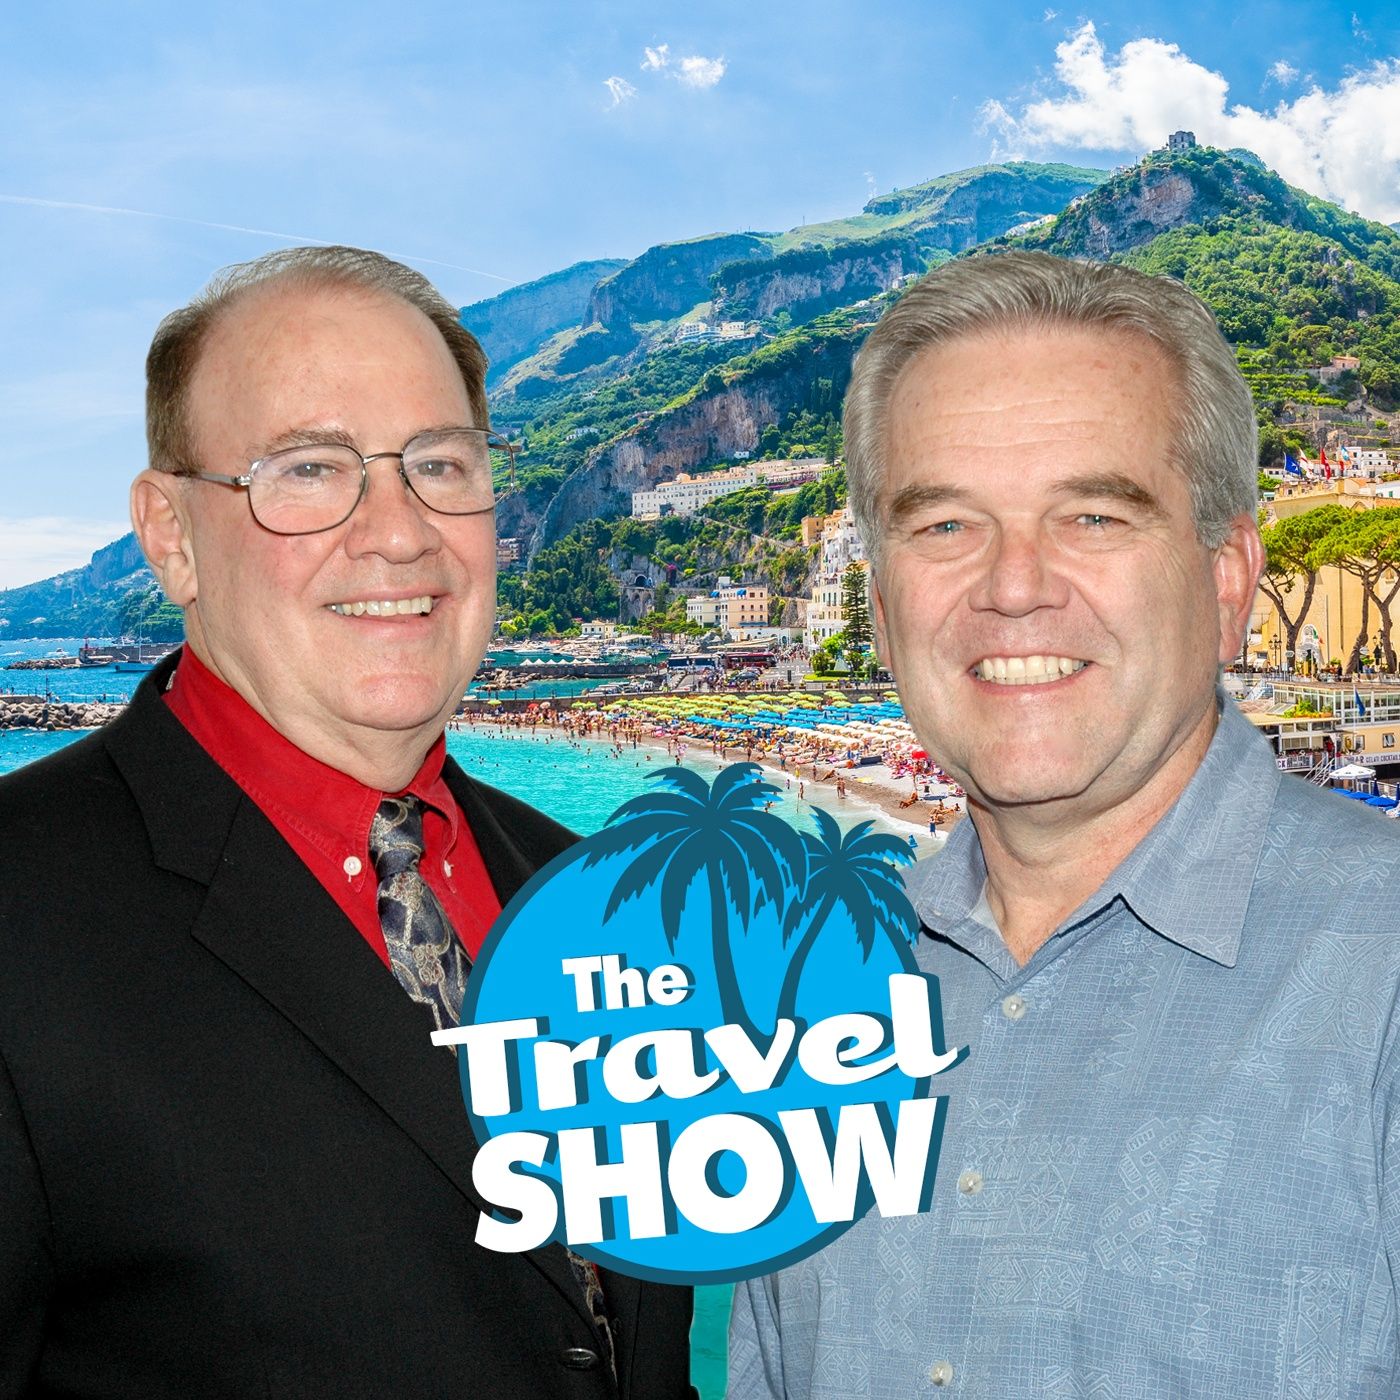 The Travel Show – Travel Advice and Travel Stories from Larry Gelwix, Carlos Fida, and Dan Hone